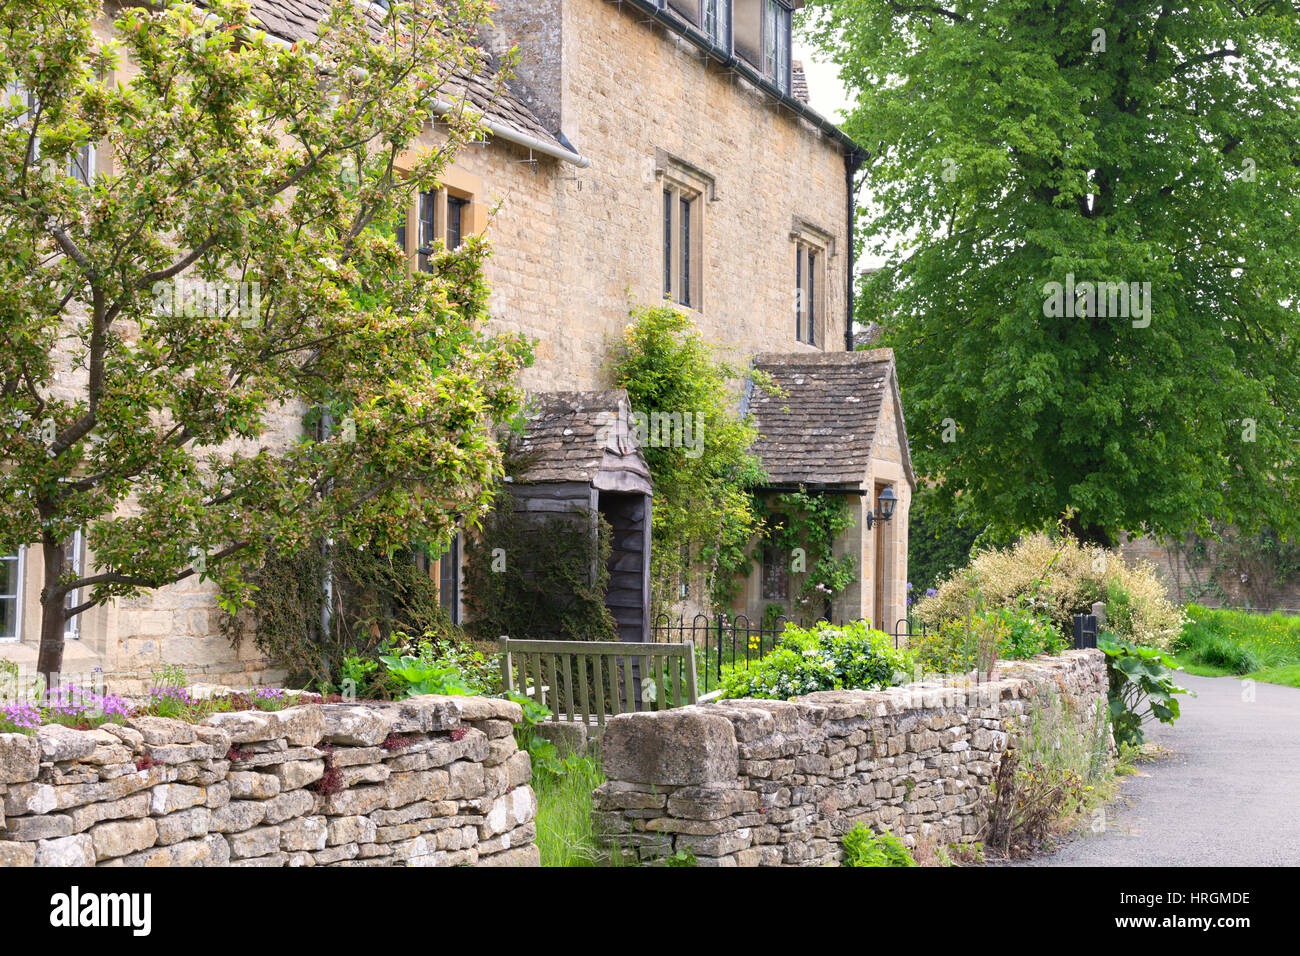 Traditional english cottages with front gardens enclosed by a dry stone wall, by a footpath, in a rural village . Stock Photo